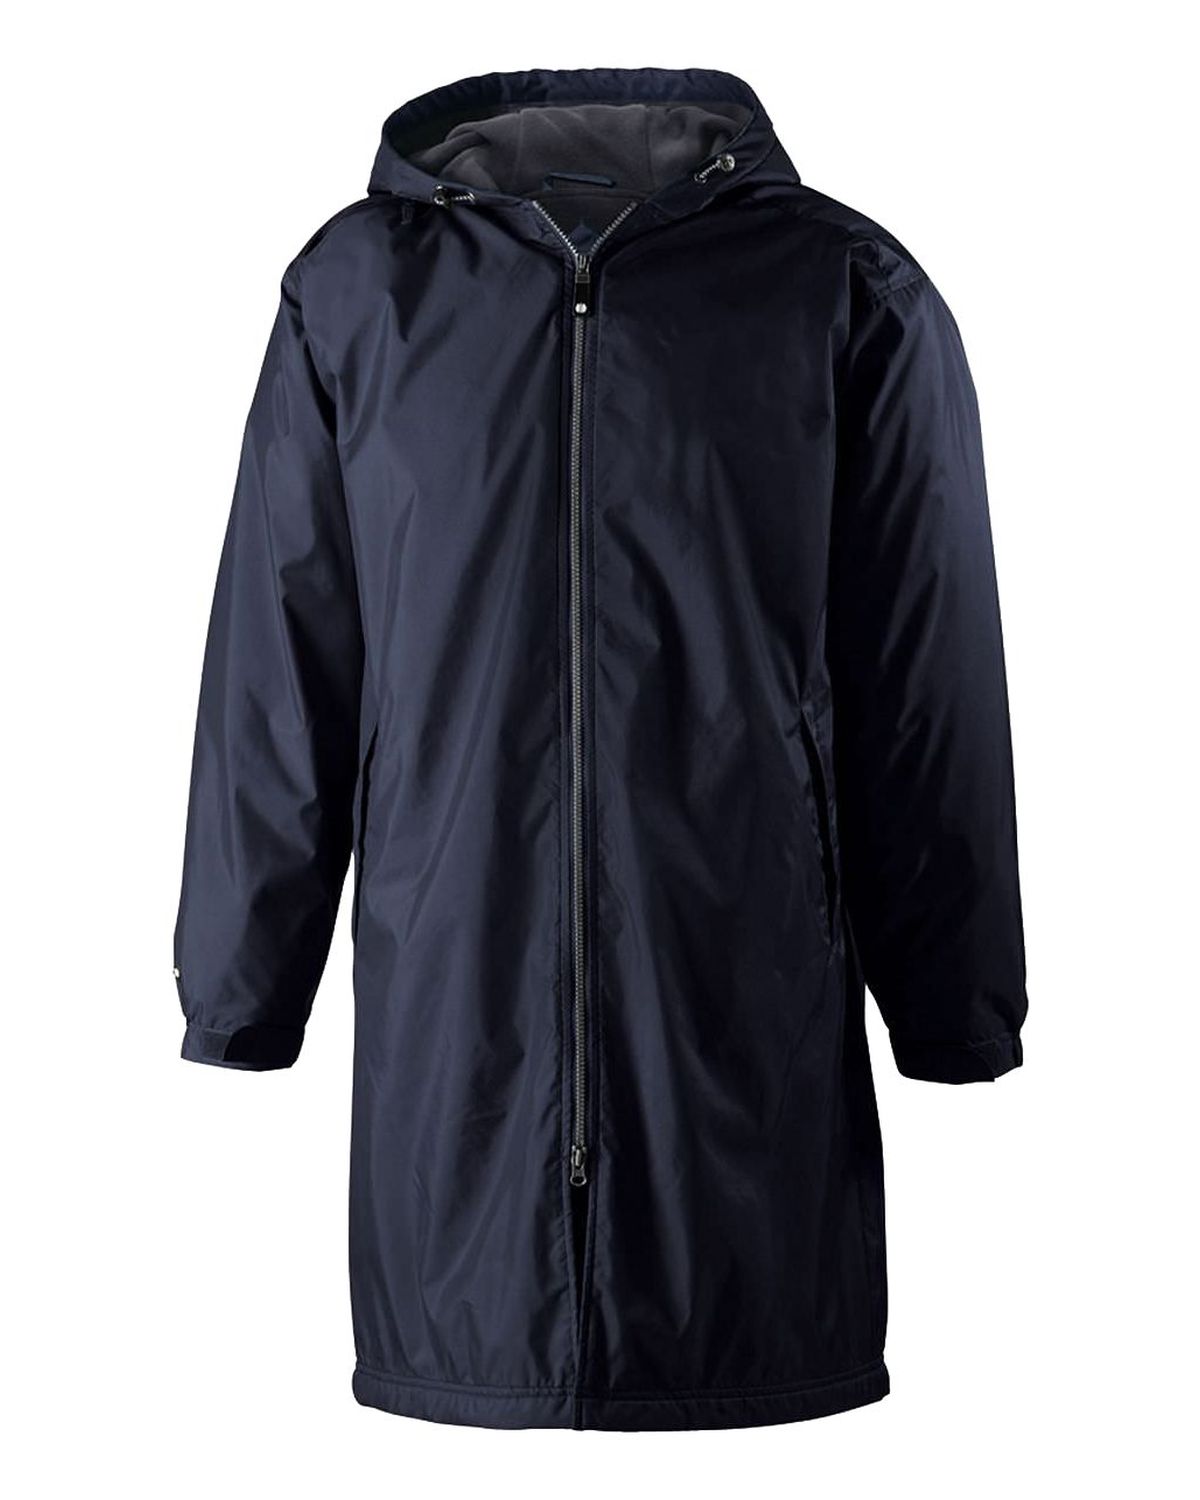 'Holloway 229162 Conquest Jacket'